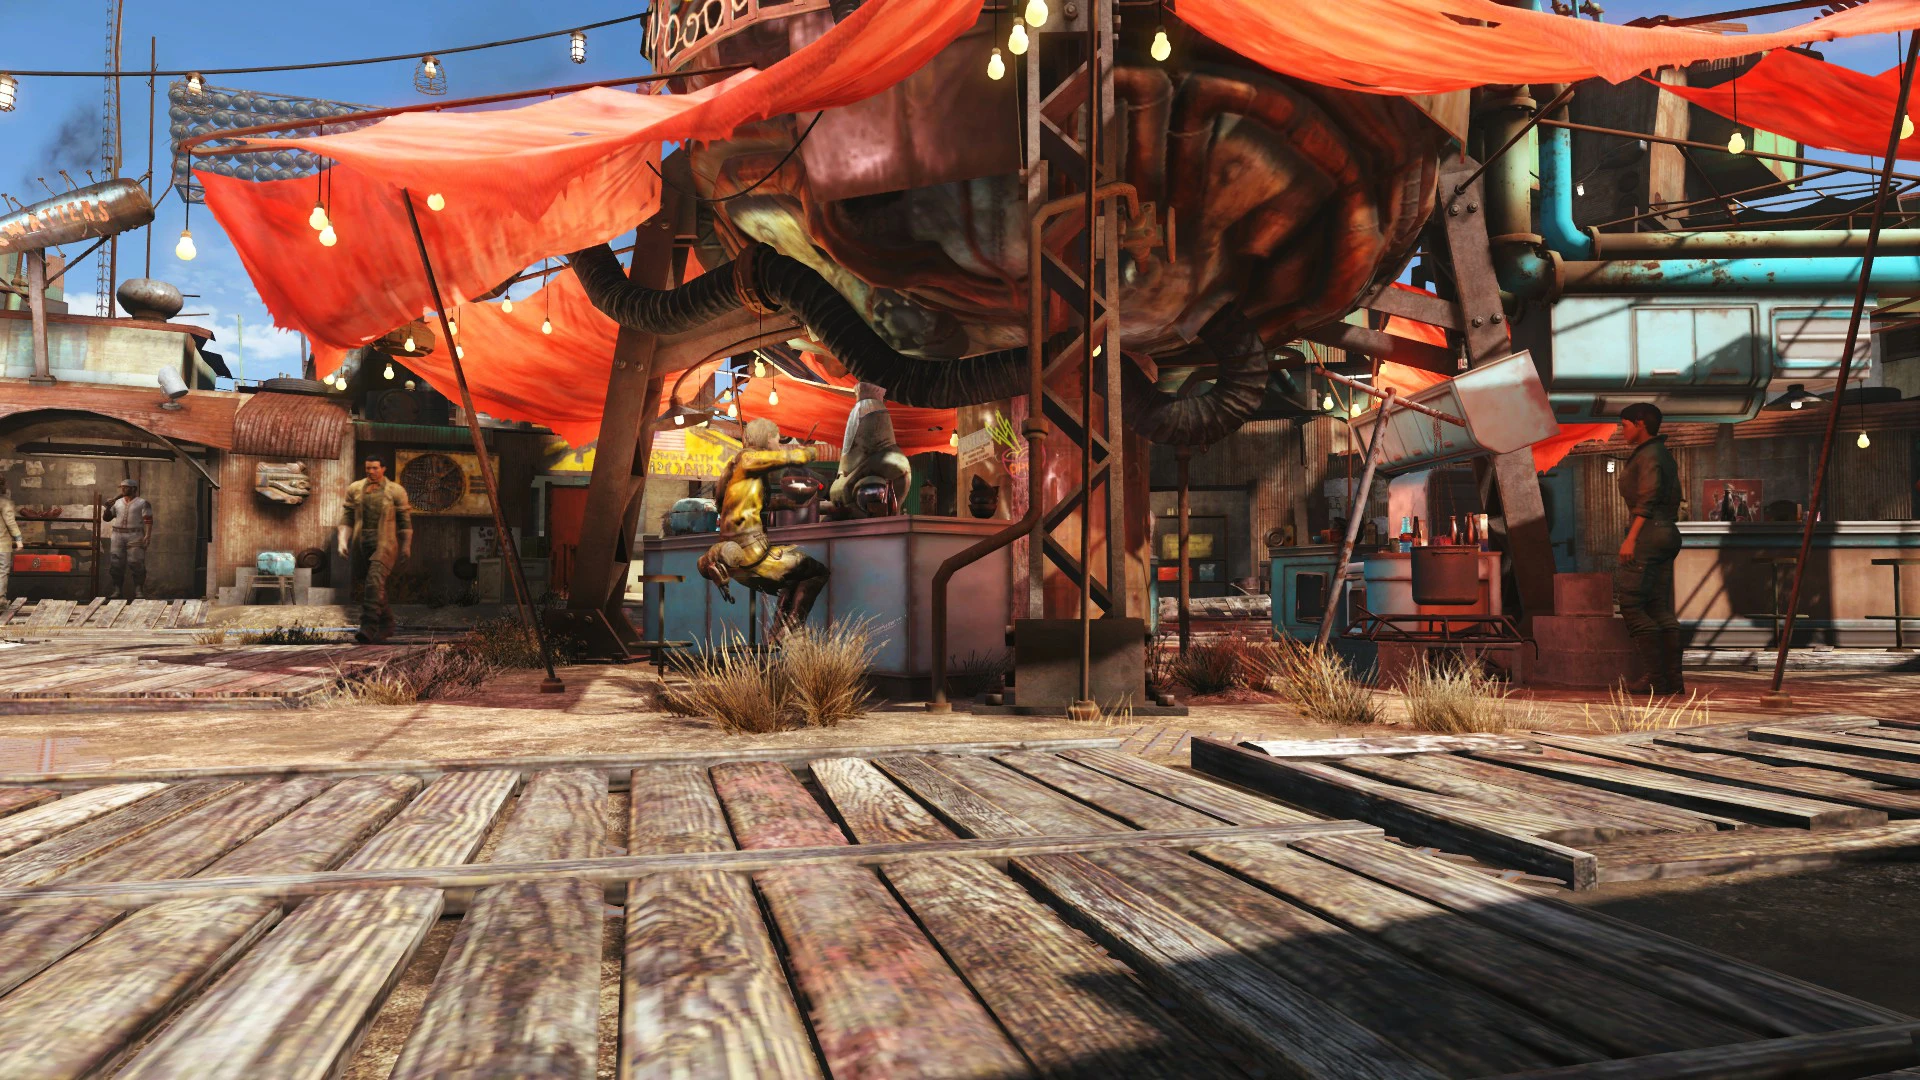 Fallout 4 more where that came from diamond city radio edition фото 23